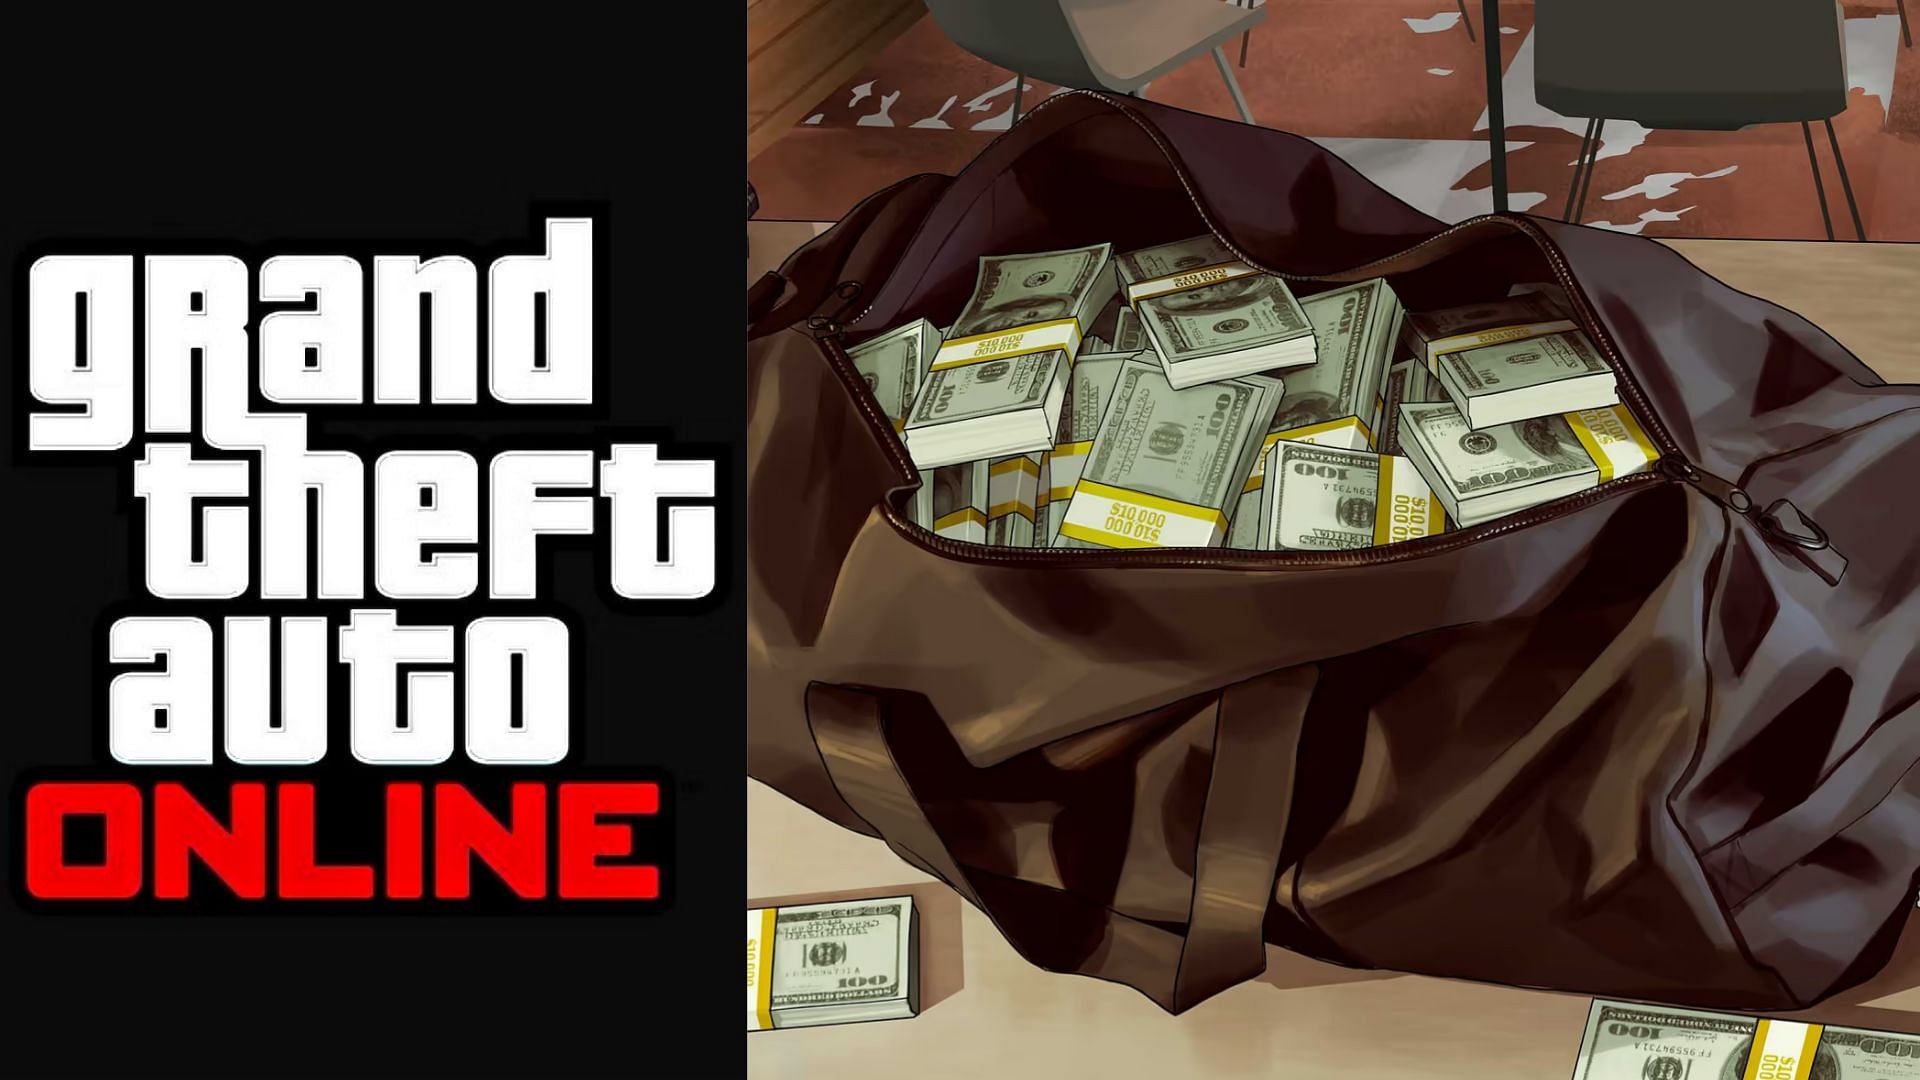 How to earn free money in GTA Online with 5 simple tips (2023)